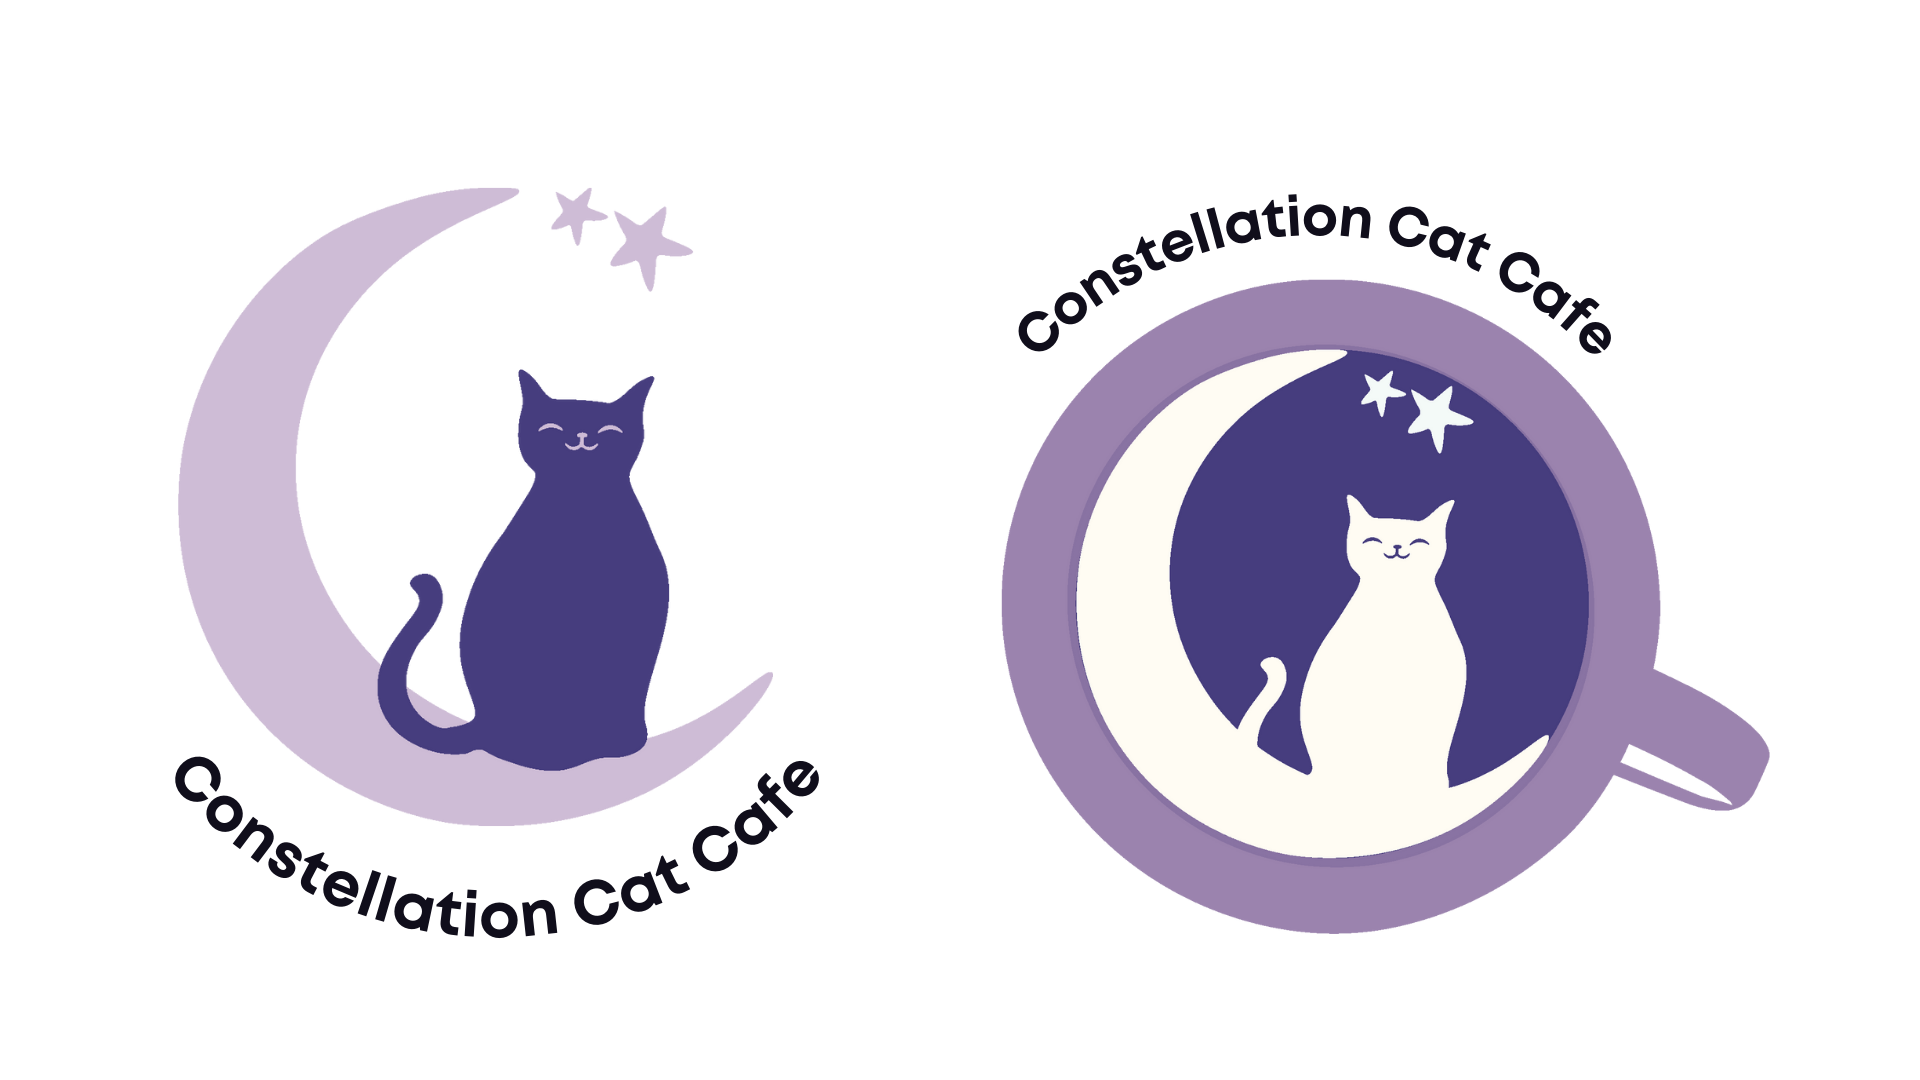 Two redesigned Constellation Cat Cafe logos: Purple cat sitting on a moon and  white cat on a moon in a cup of coffee